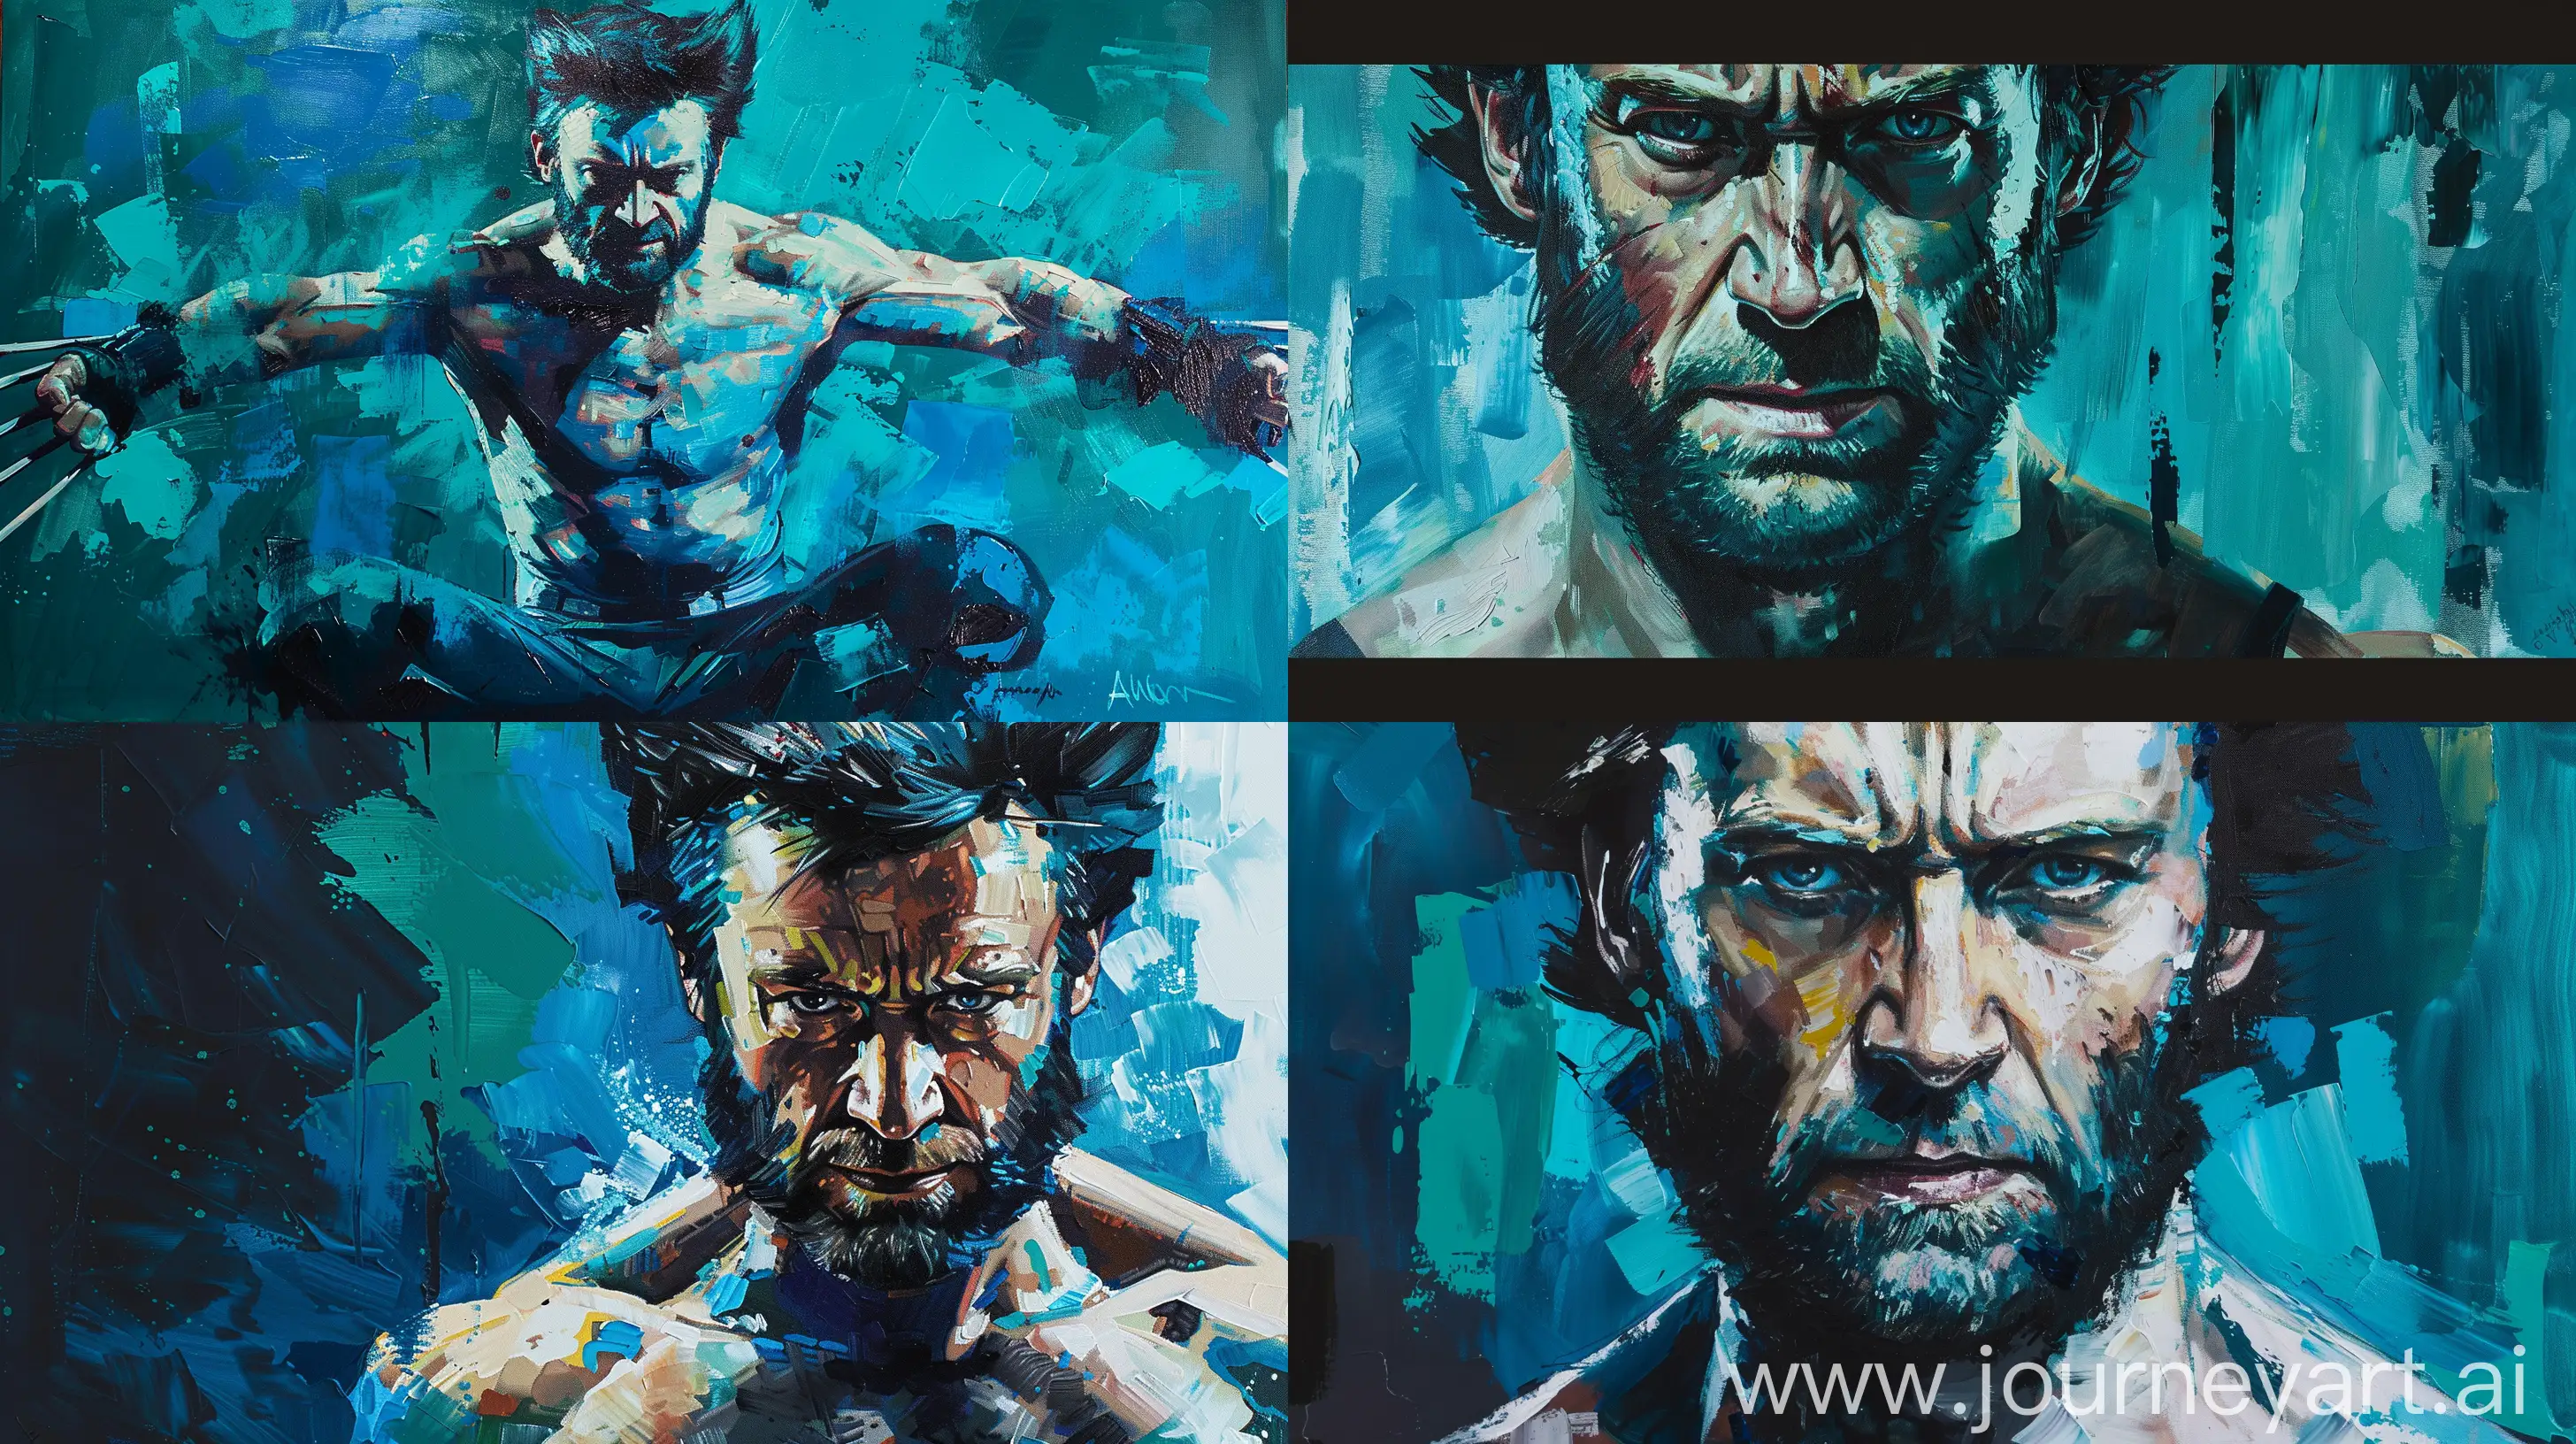 Epic-Oil-Painting-of-Wolverine-as-a-Star-Wars-Character